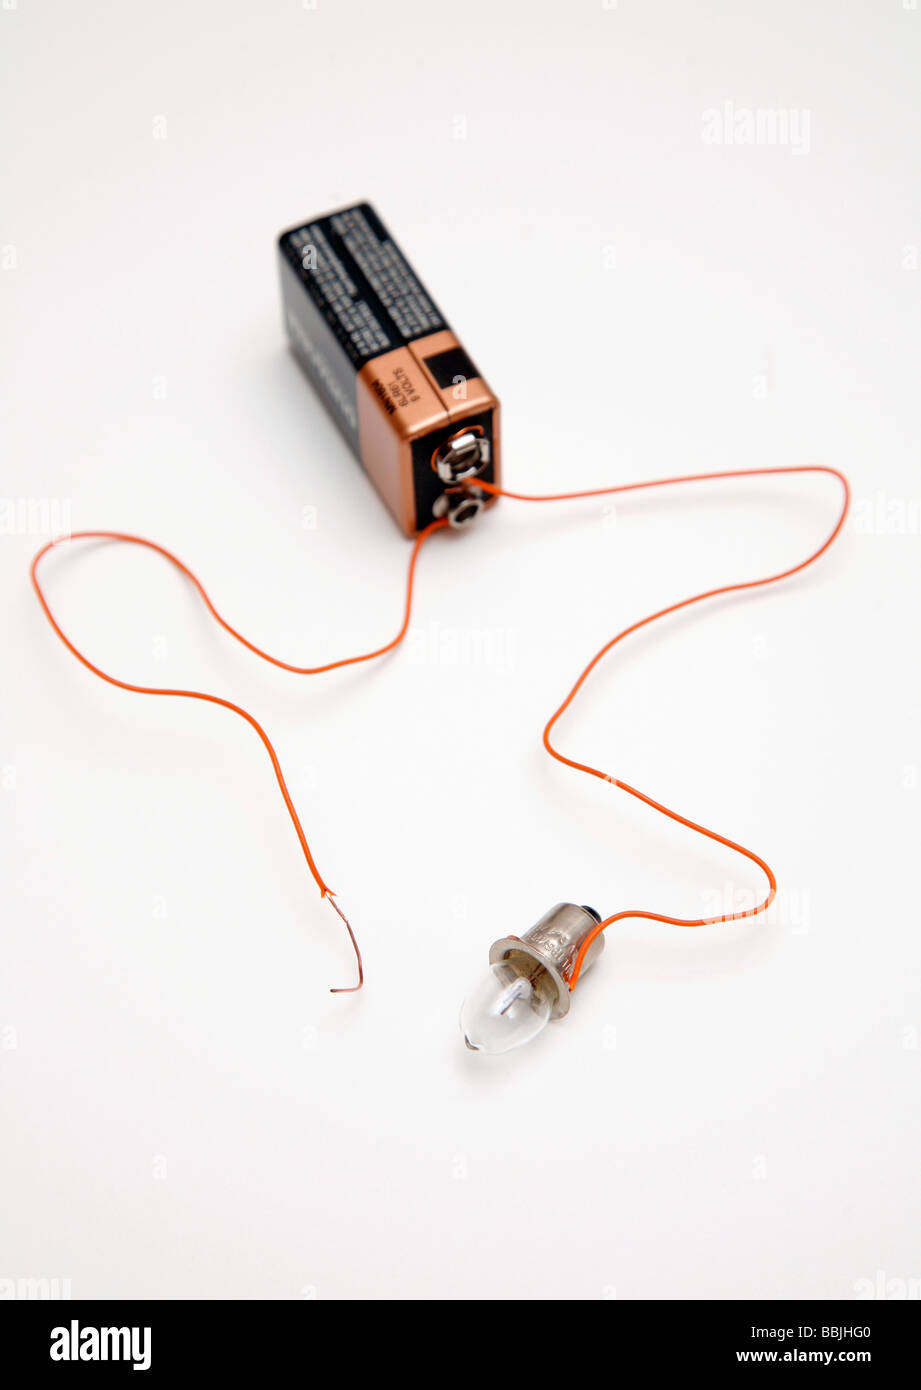 battery and bulb circuit with one wire not attached to bulb Stock Photo